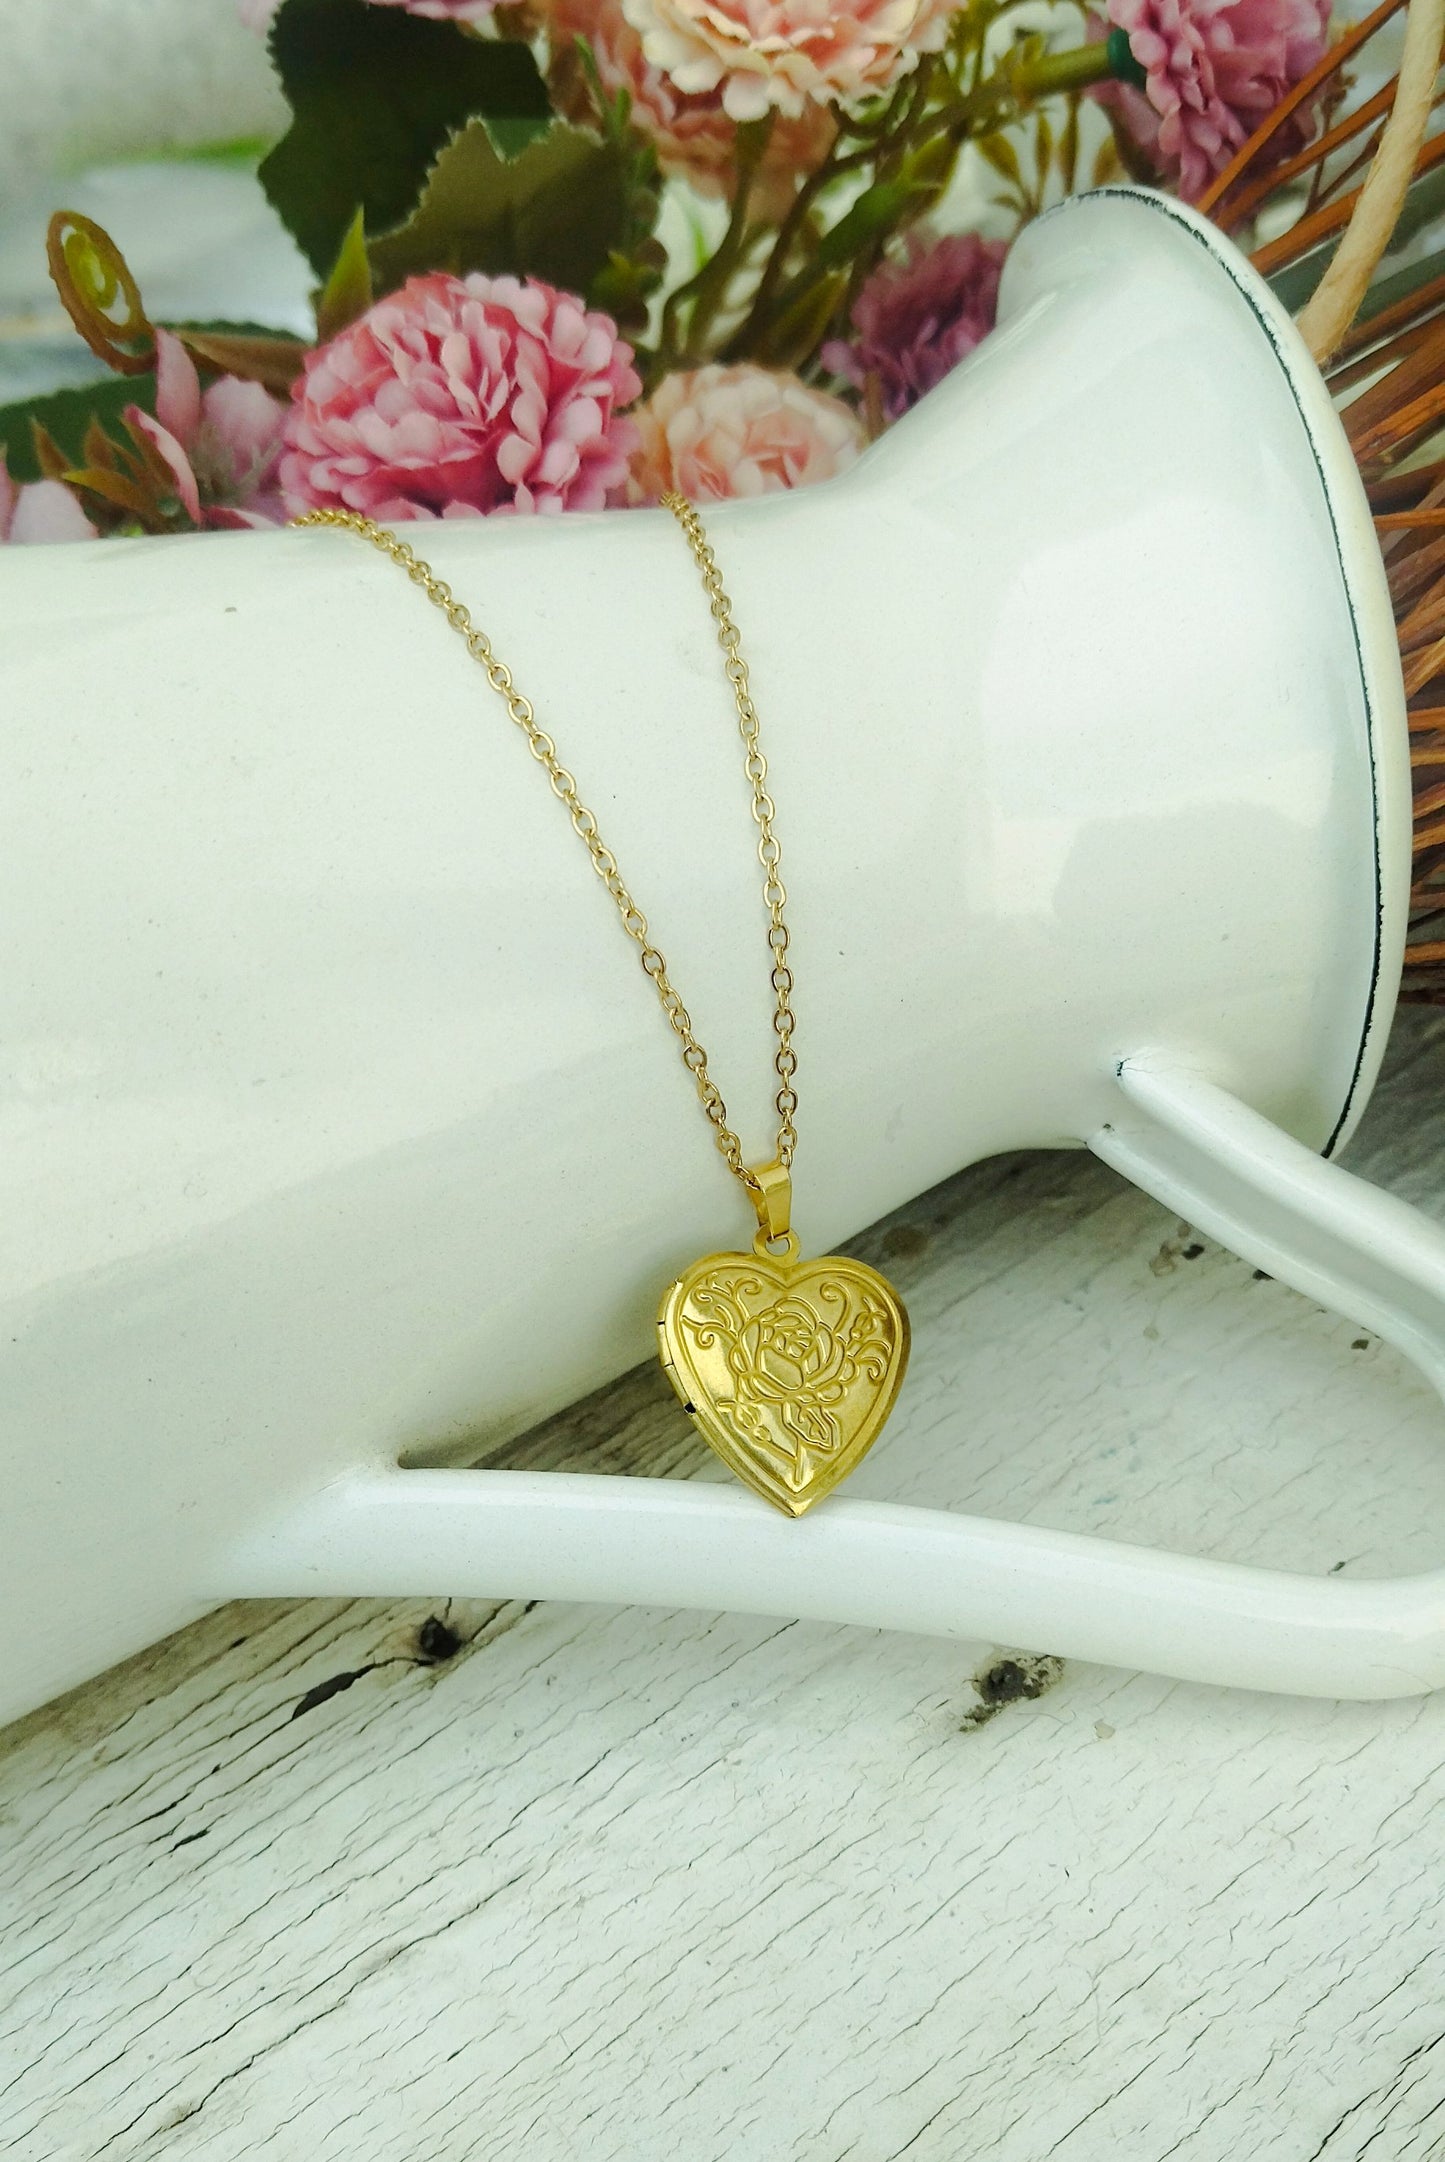 Gold Heart Locket Necklace, 2 Pictures Pendant With Engraved Rose Flower